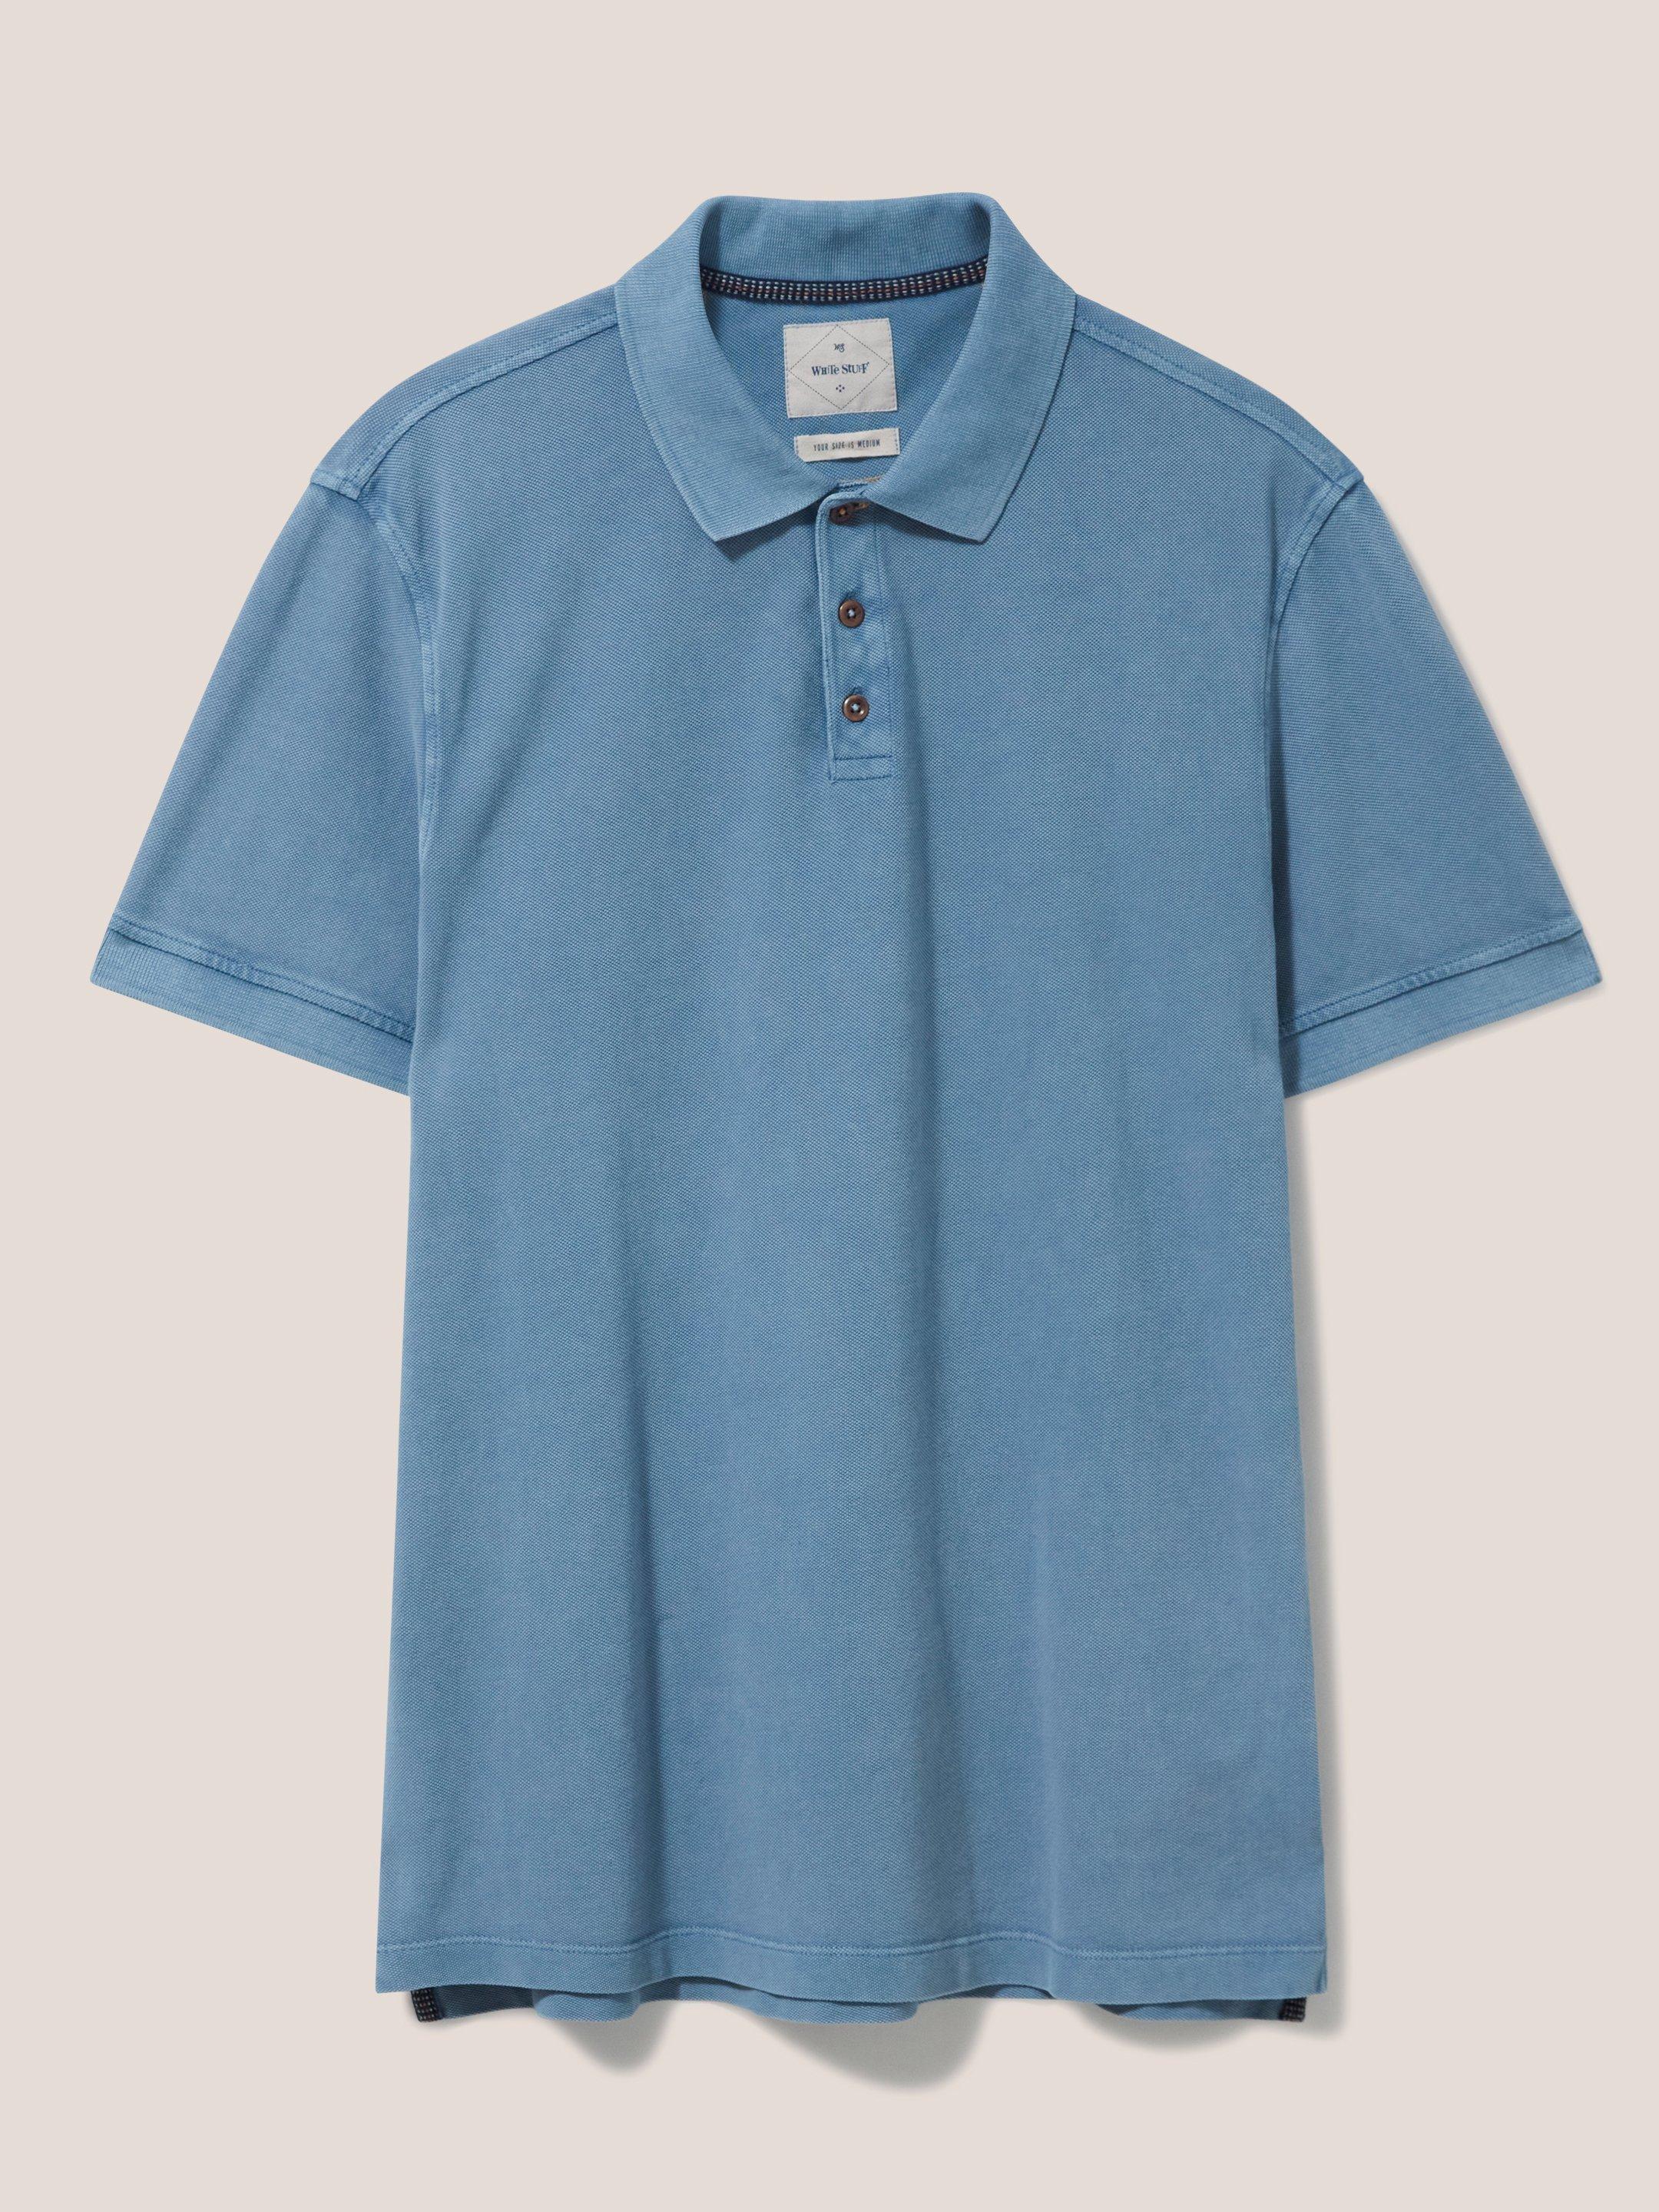 Utility Polo in CHAMB BLUE - FLAT FRONT